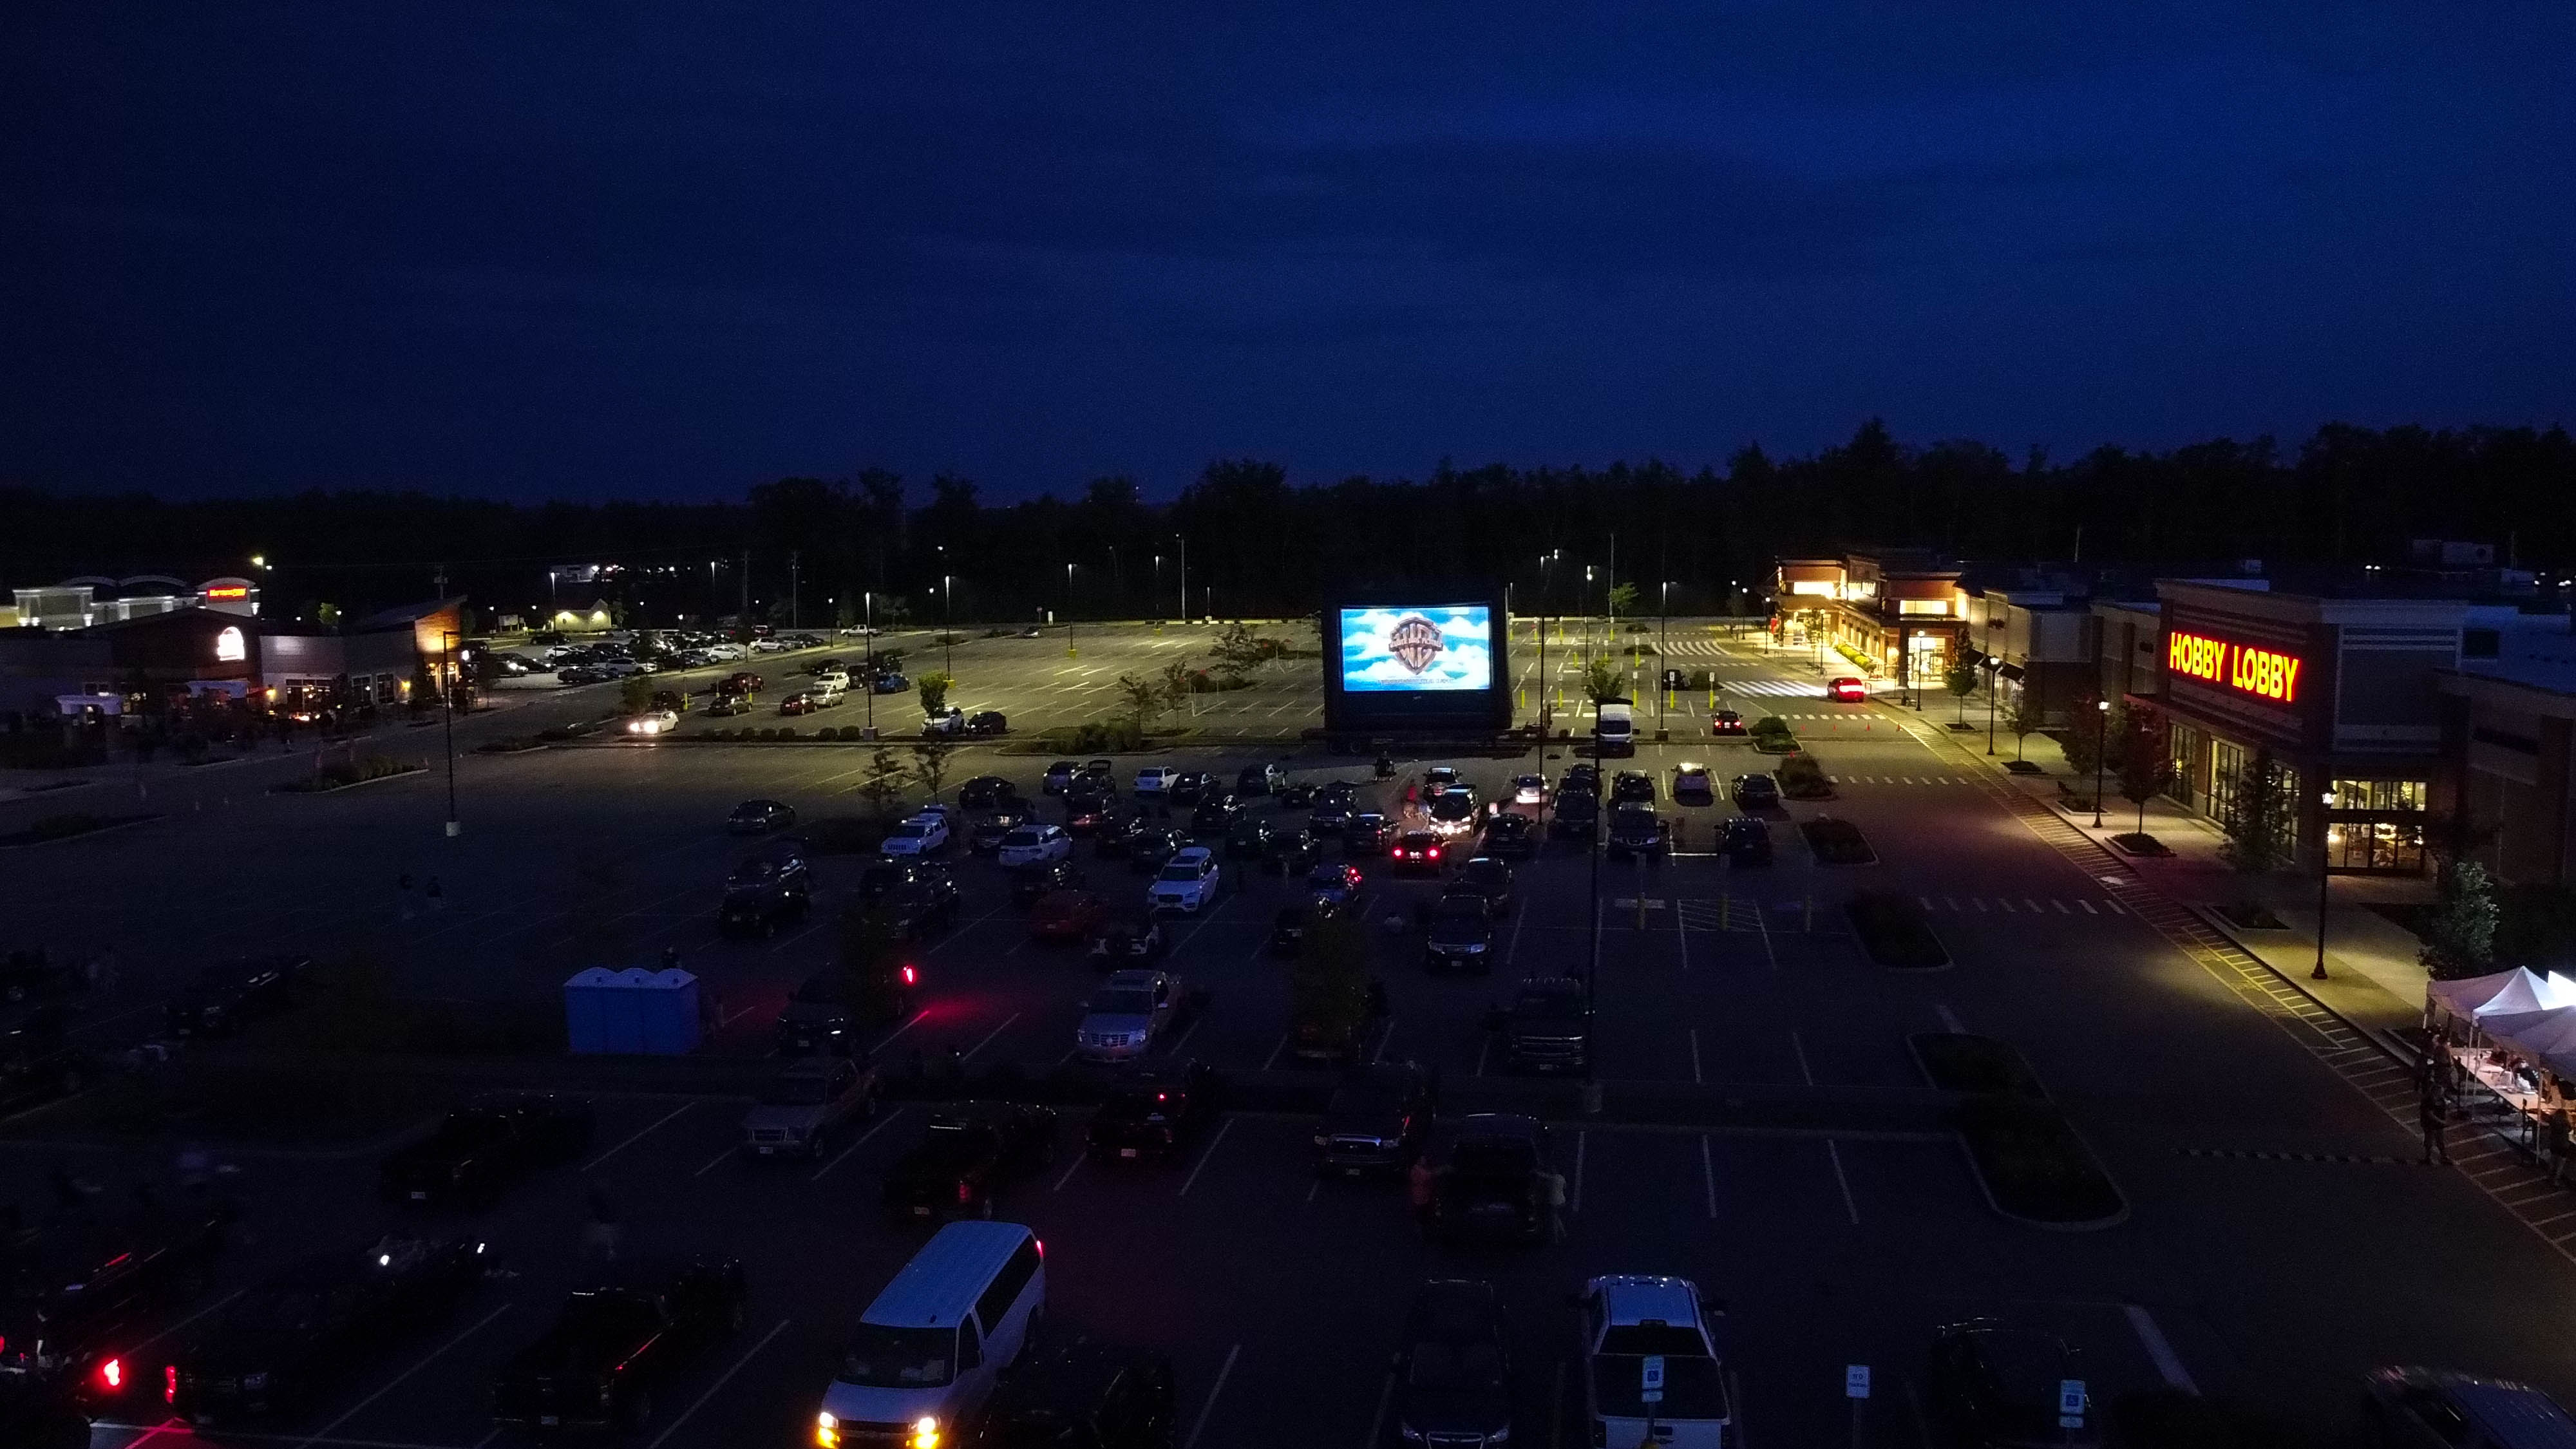 The Ridge in Rochester offers free movies, fun summer events: Here's the schedule